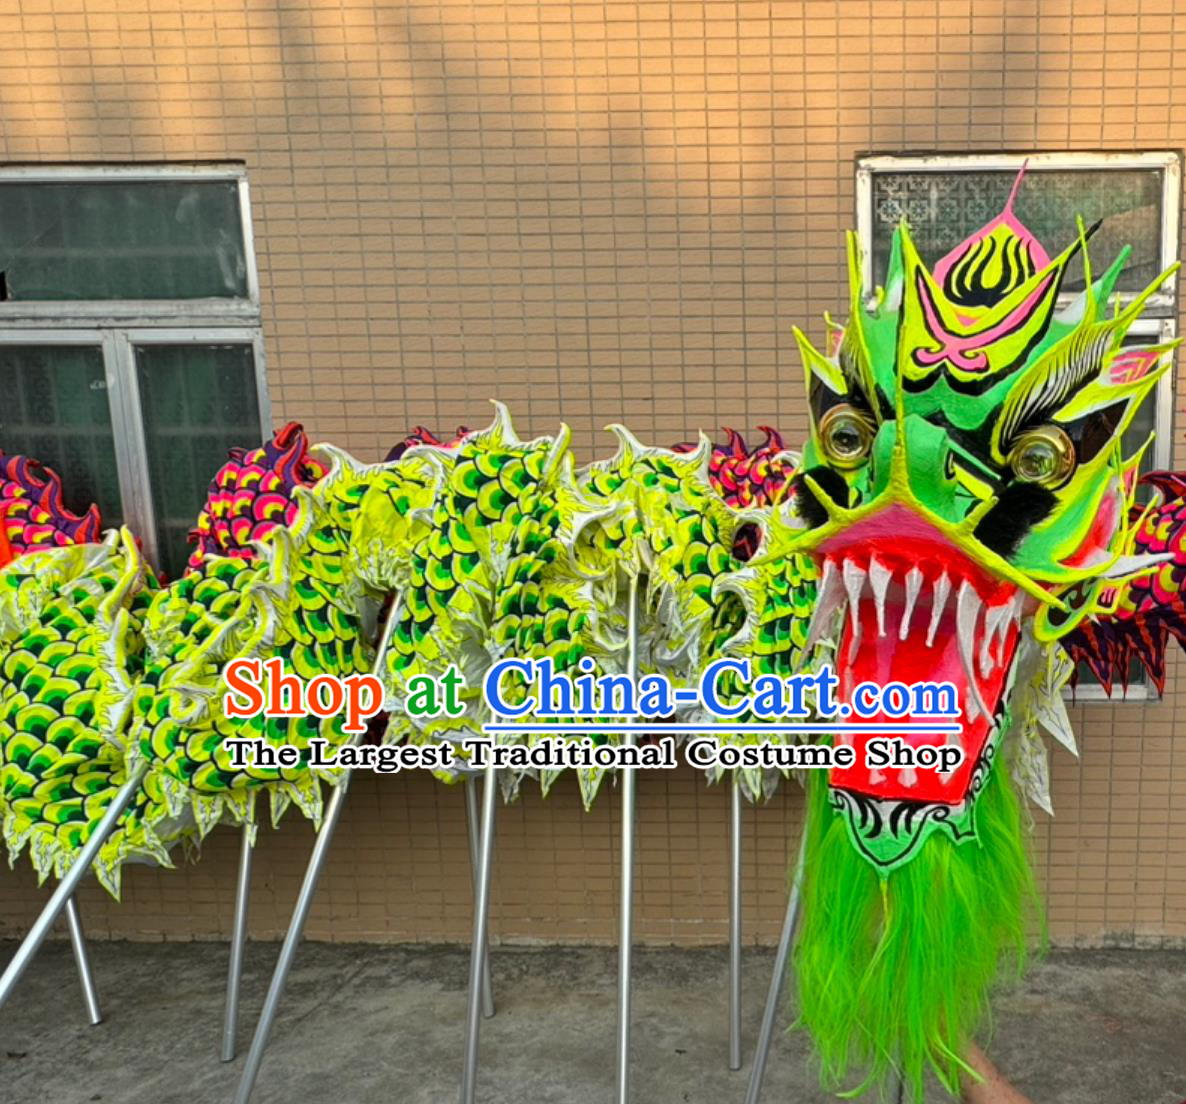 Chinese Dragon Dance Green Fluorescent Costume Celebration Parade Dragon Costume Professional Competition Dragon Dancing Prop